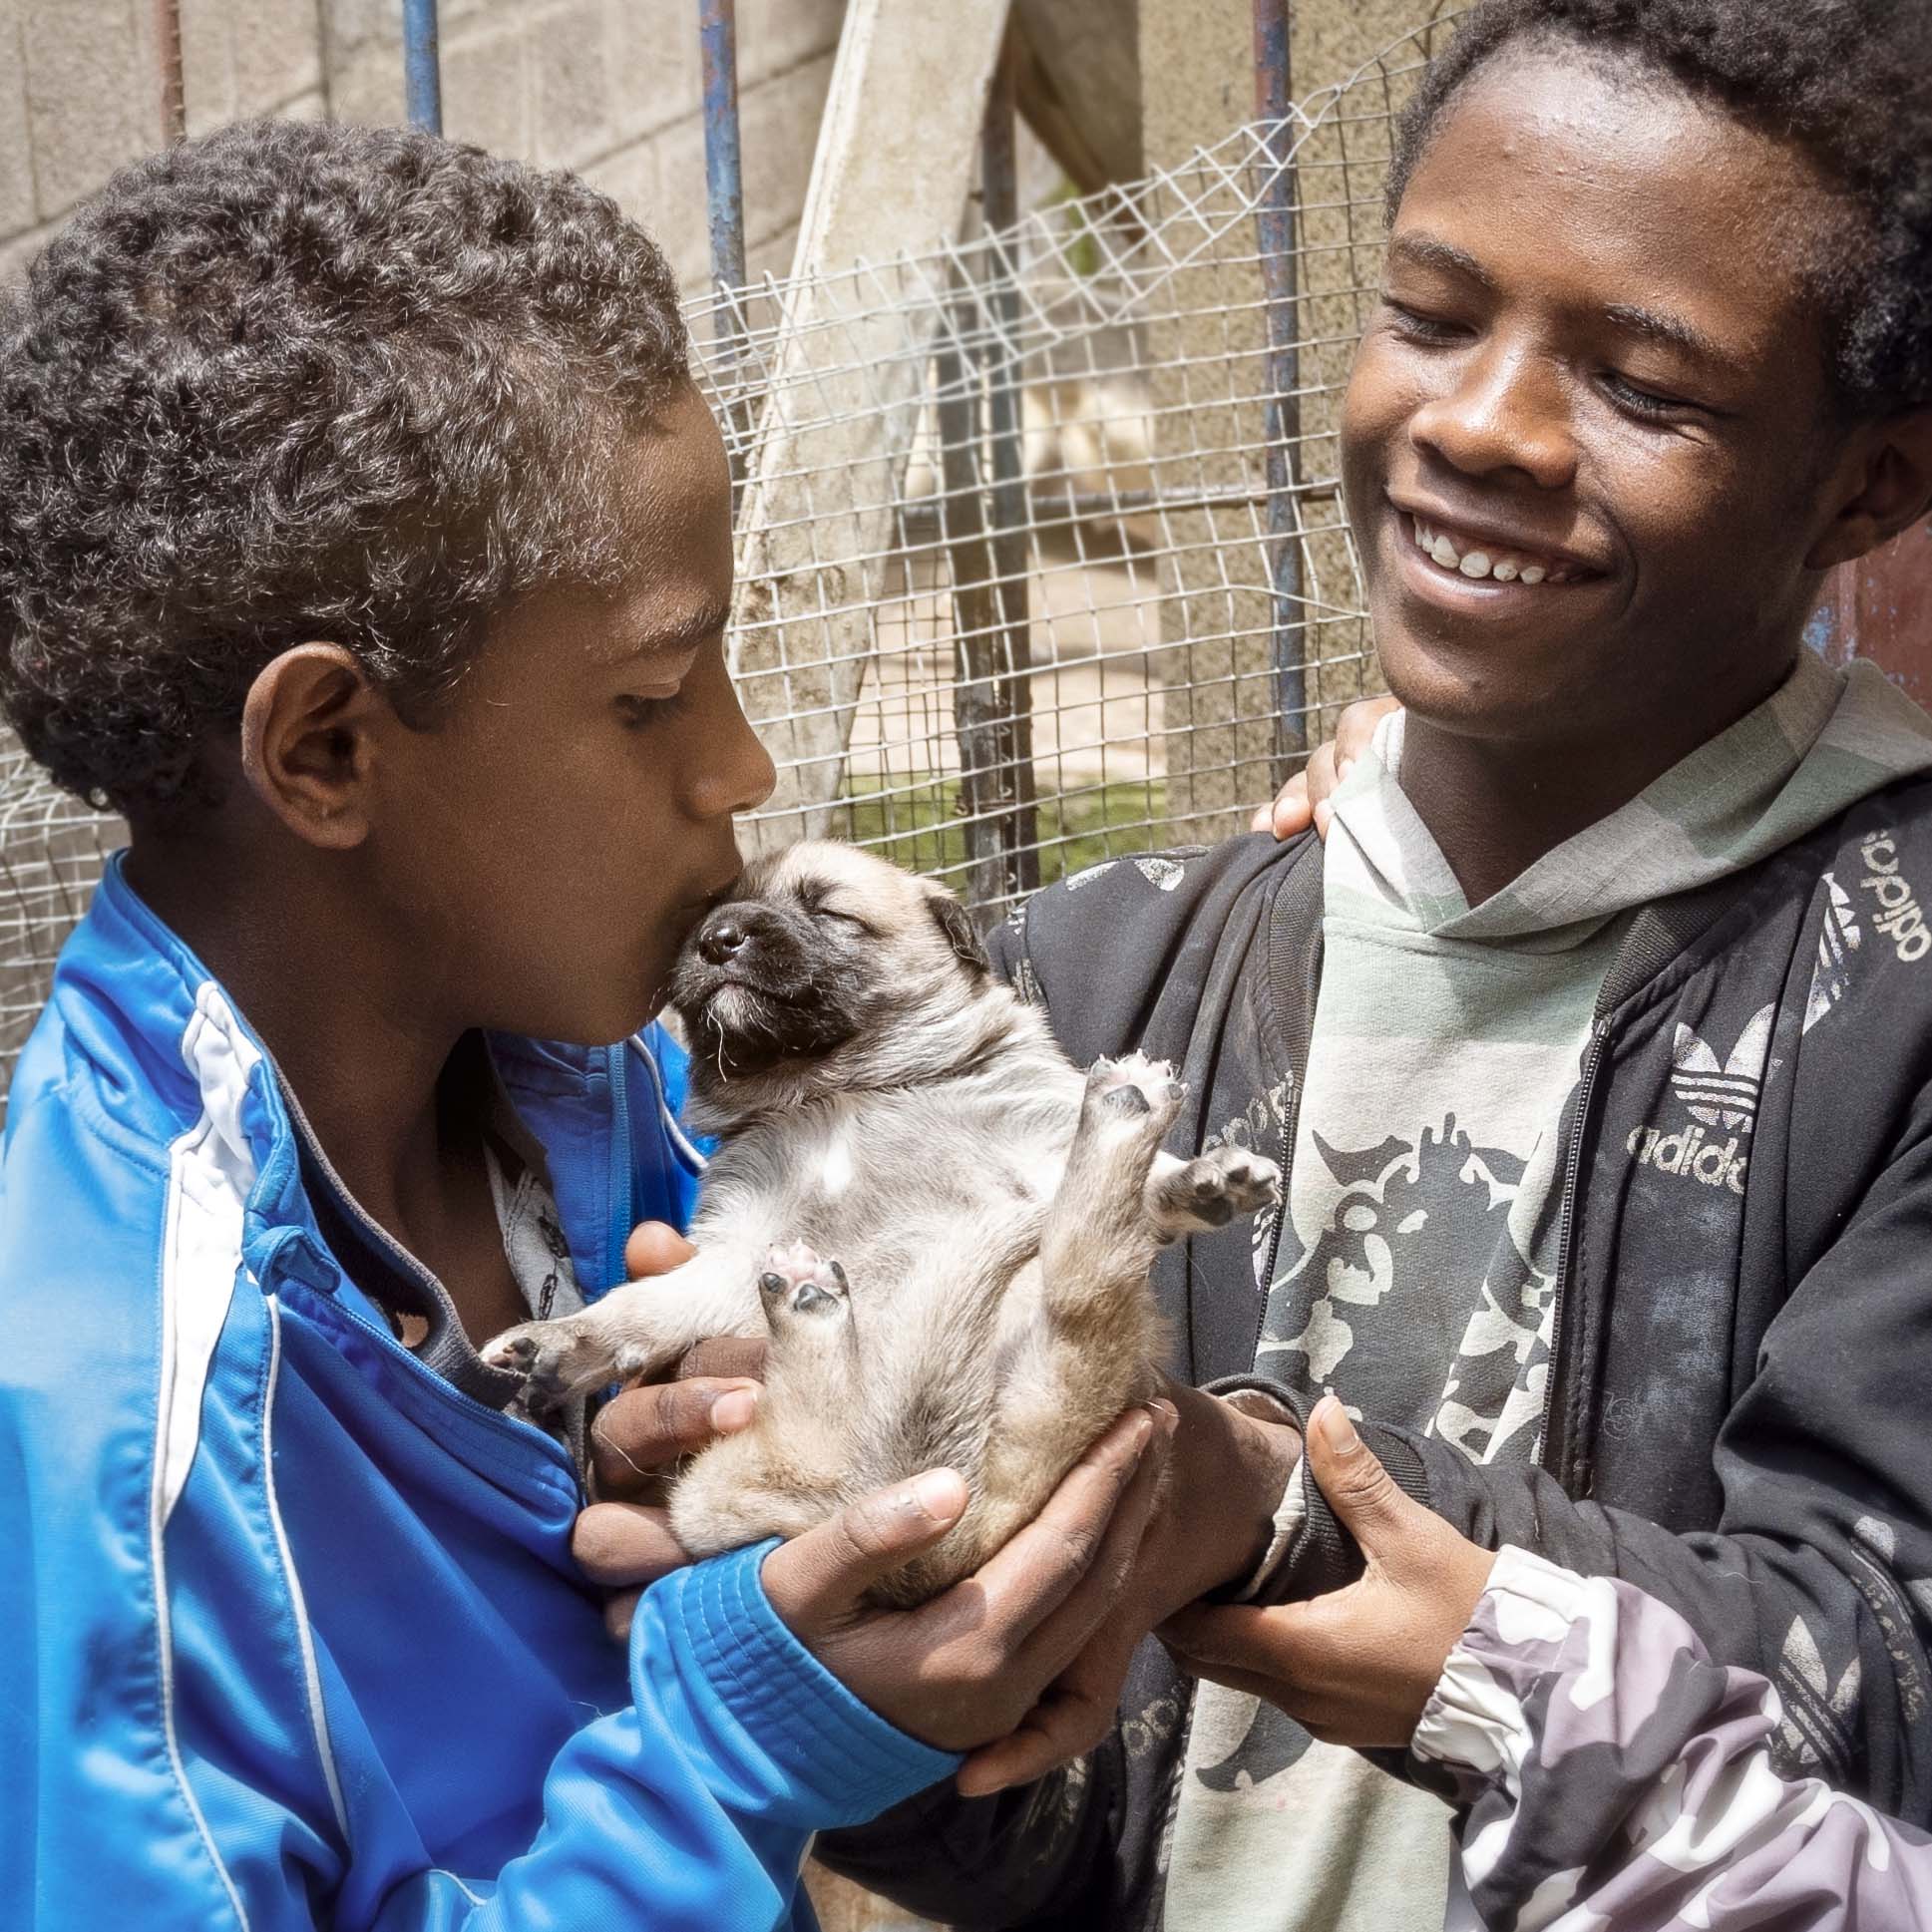 youth programs, beautiful together, Ethiopia, pet therapy, chapel hill, North Carolina